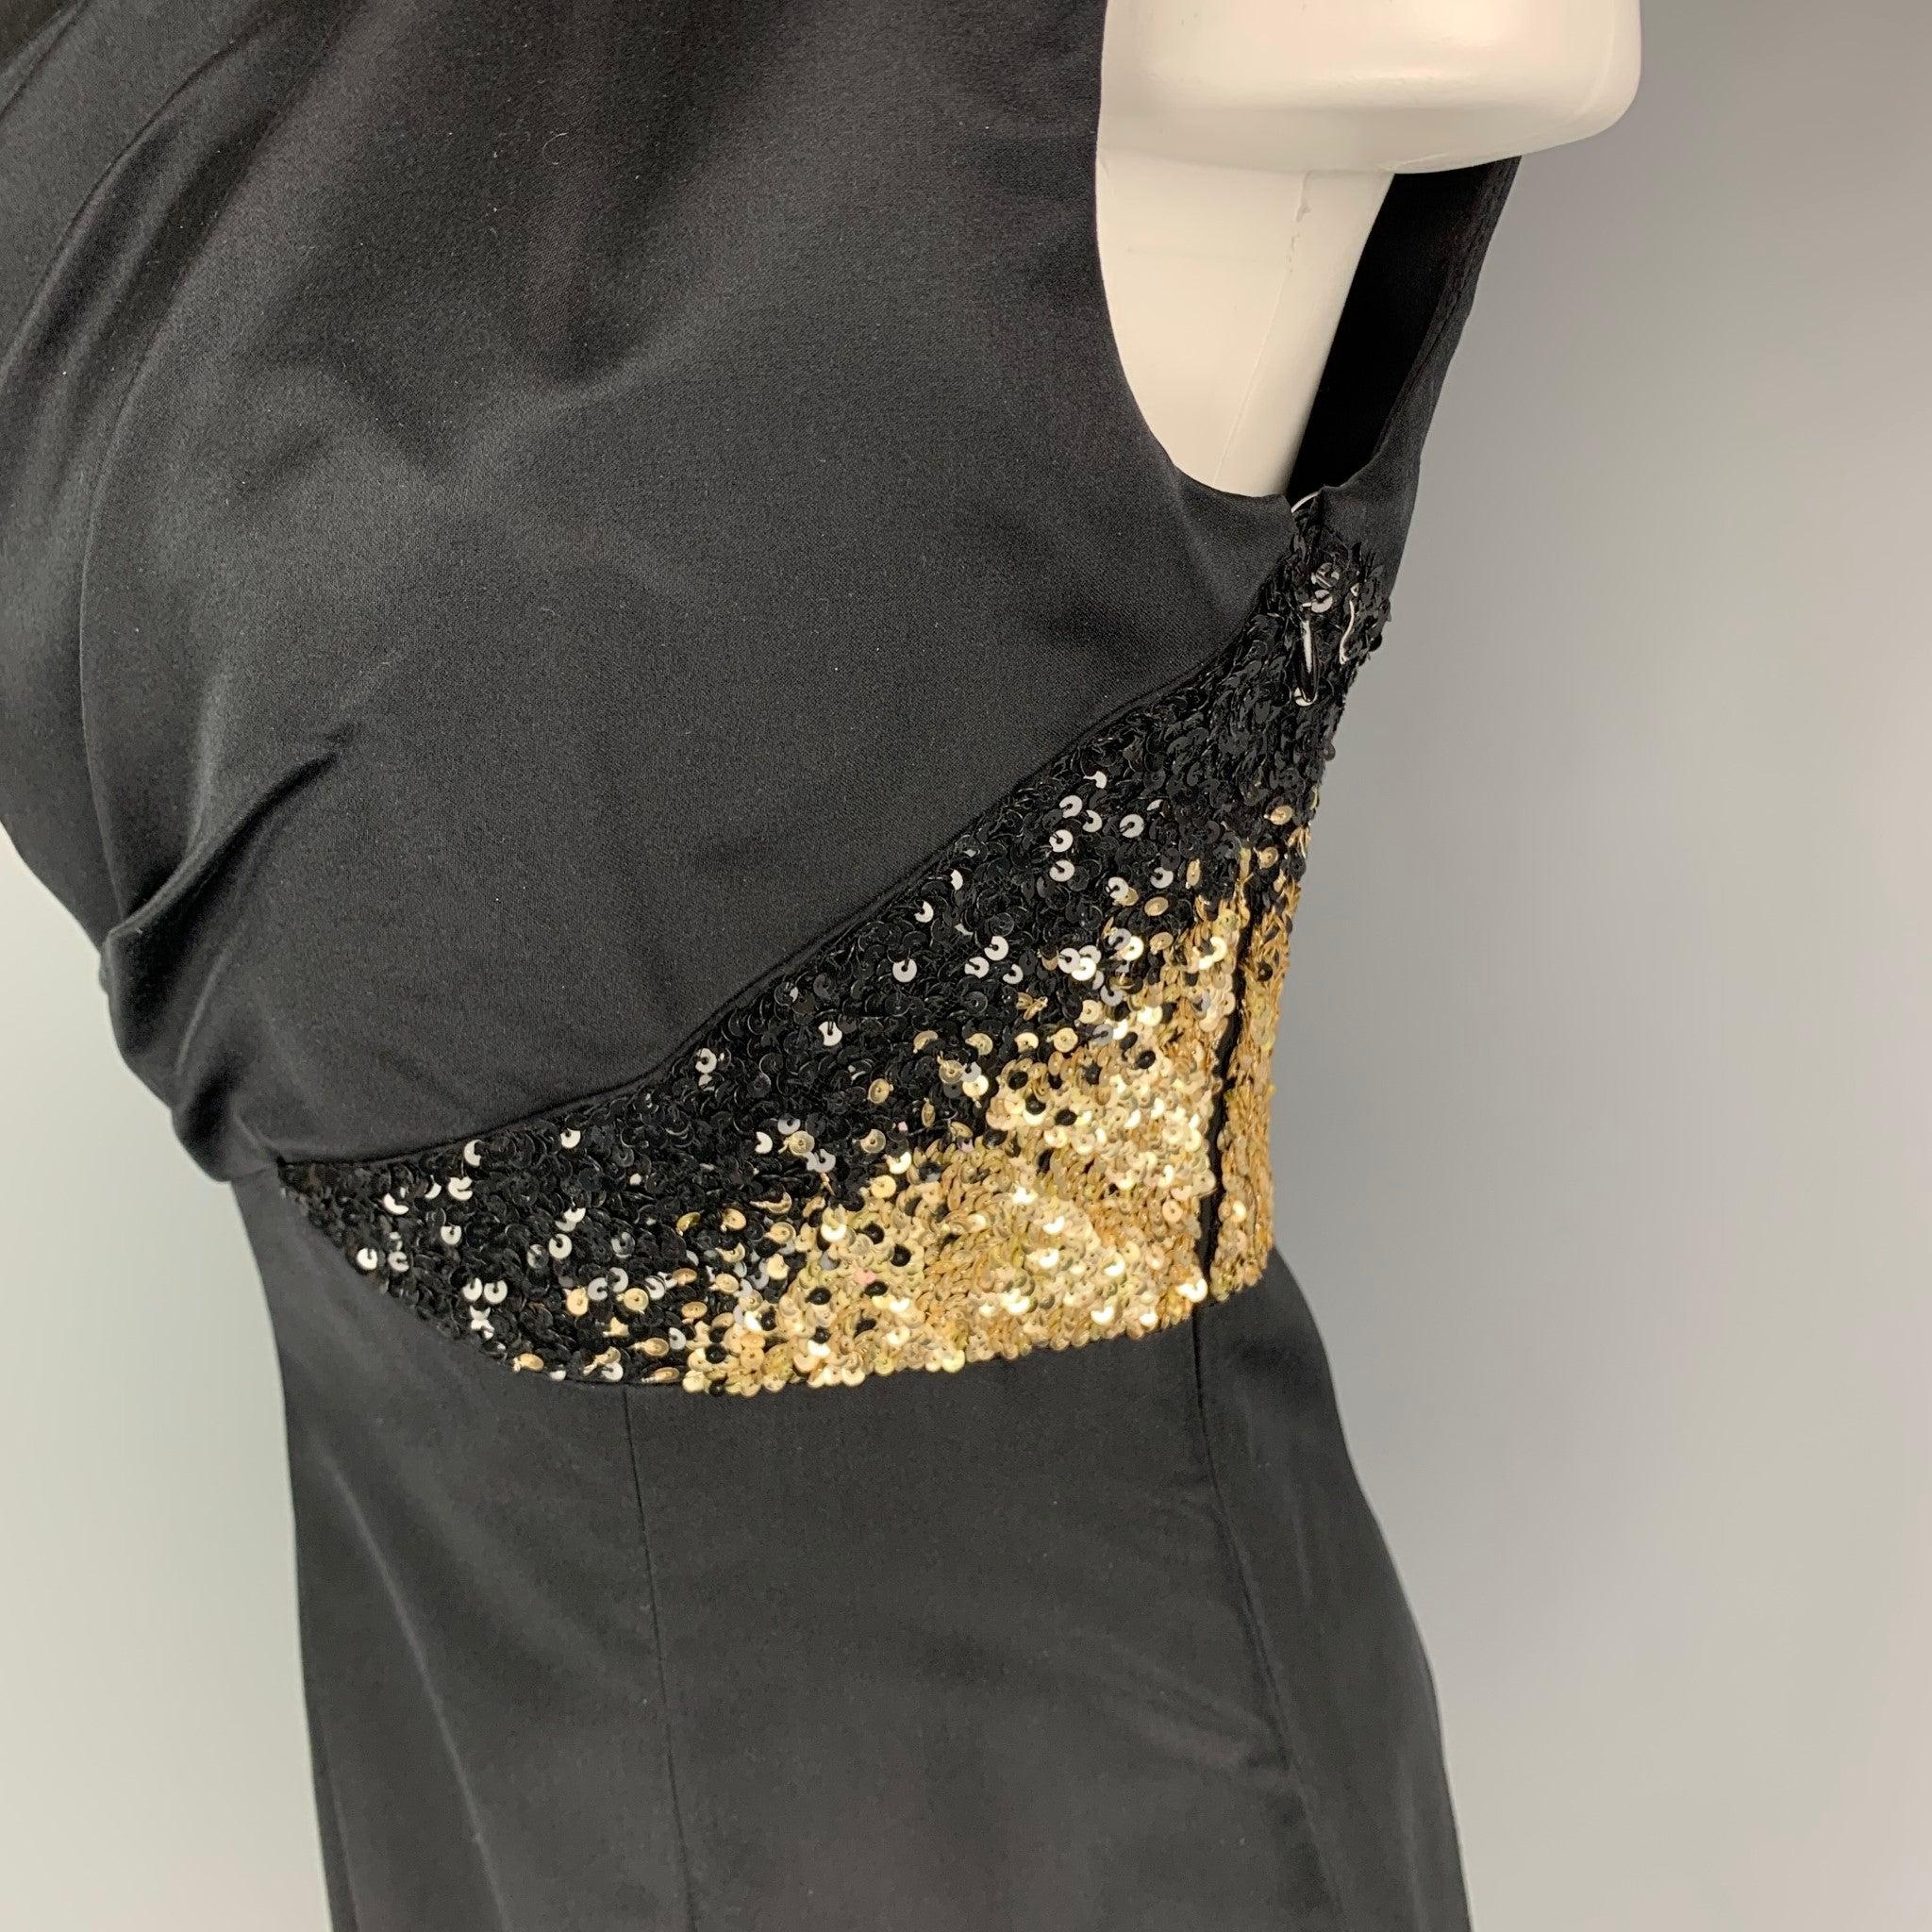 MONIQUE LHUILLIER dress comes in a black rayon featuring a ruched bodice, gold sequined trim, padded shoulders, and a side zipper closure. Made in USA.
Very Good
Pre-Owned Condition. 

Marked:   4 

Measurements: 
 
Shoulder: 18 inches Bust: 34